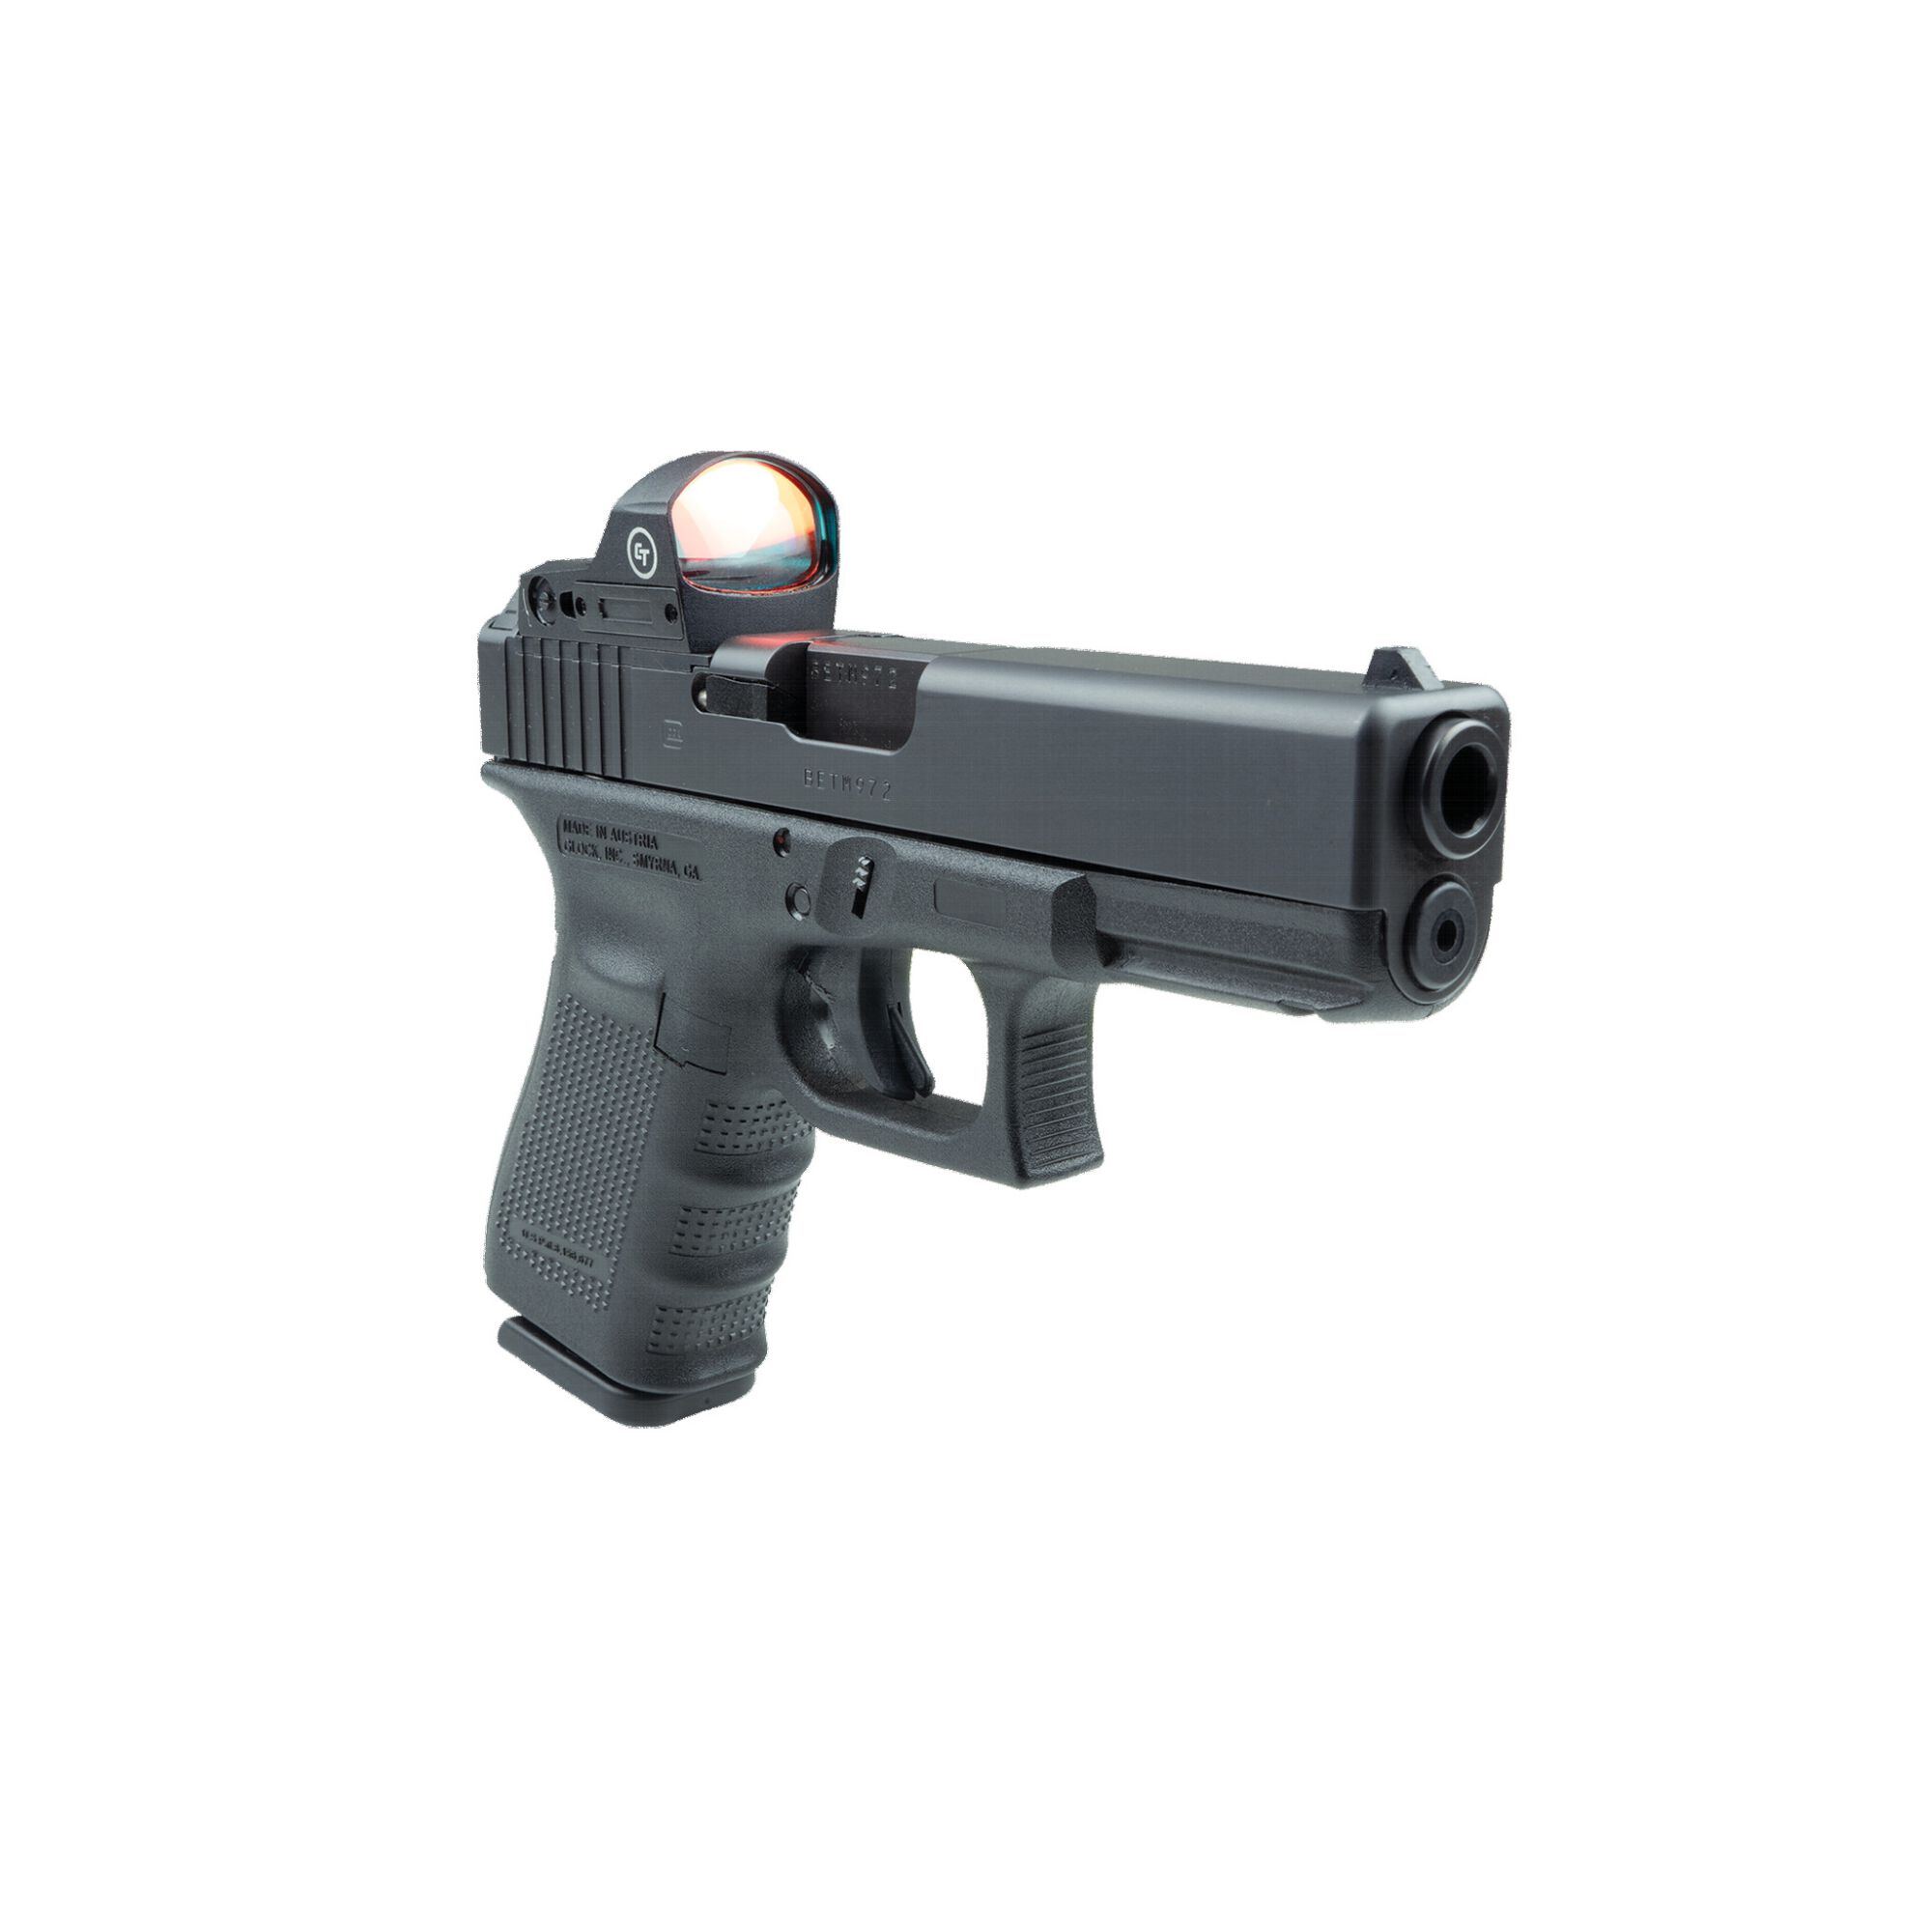 Black Crimson Trace CTS-1250 Compact Open Reflex Pistol Sight with Low Profile LED 3.25 MOA Red Dot and Adjustable Brightness for Handguns